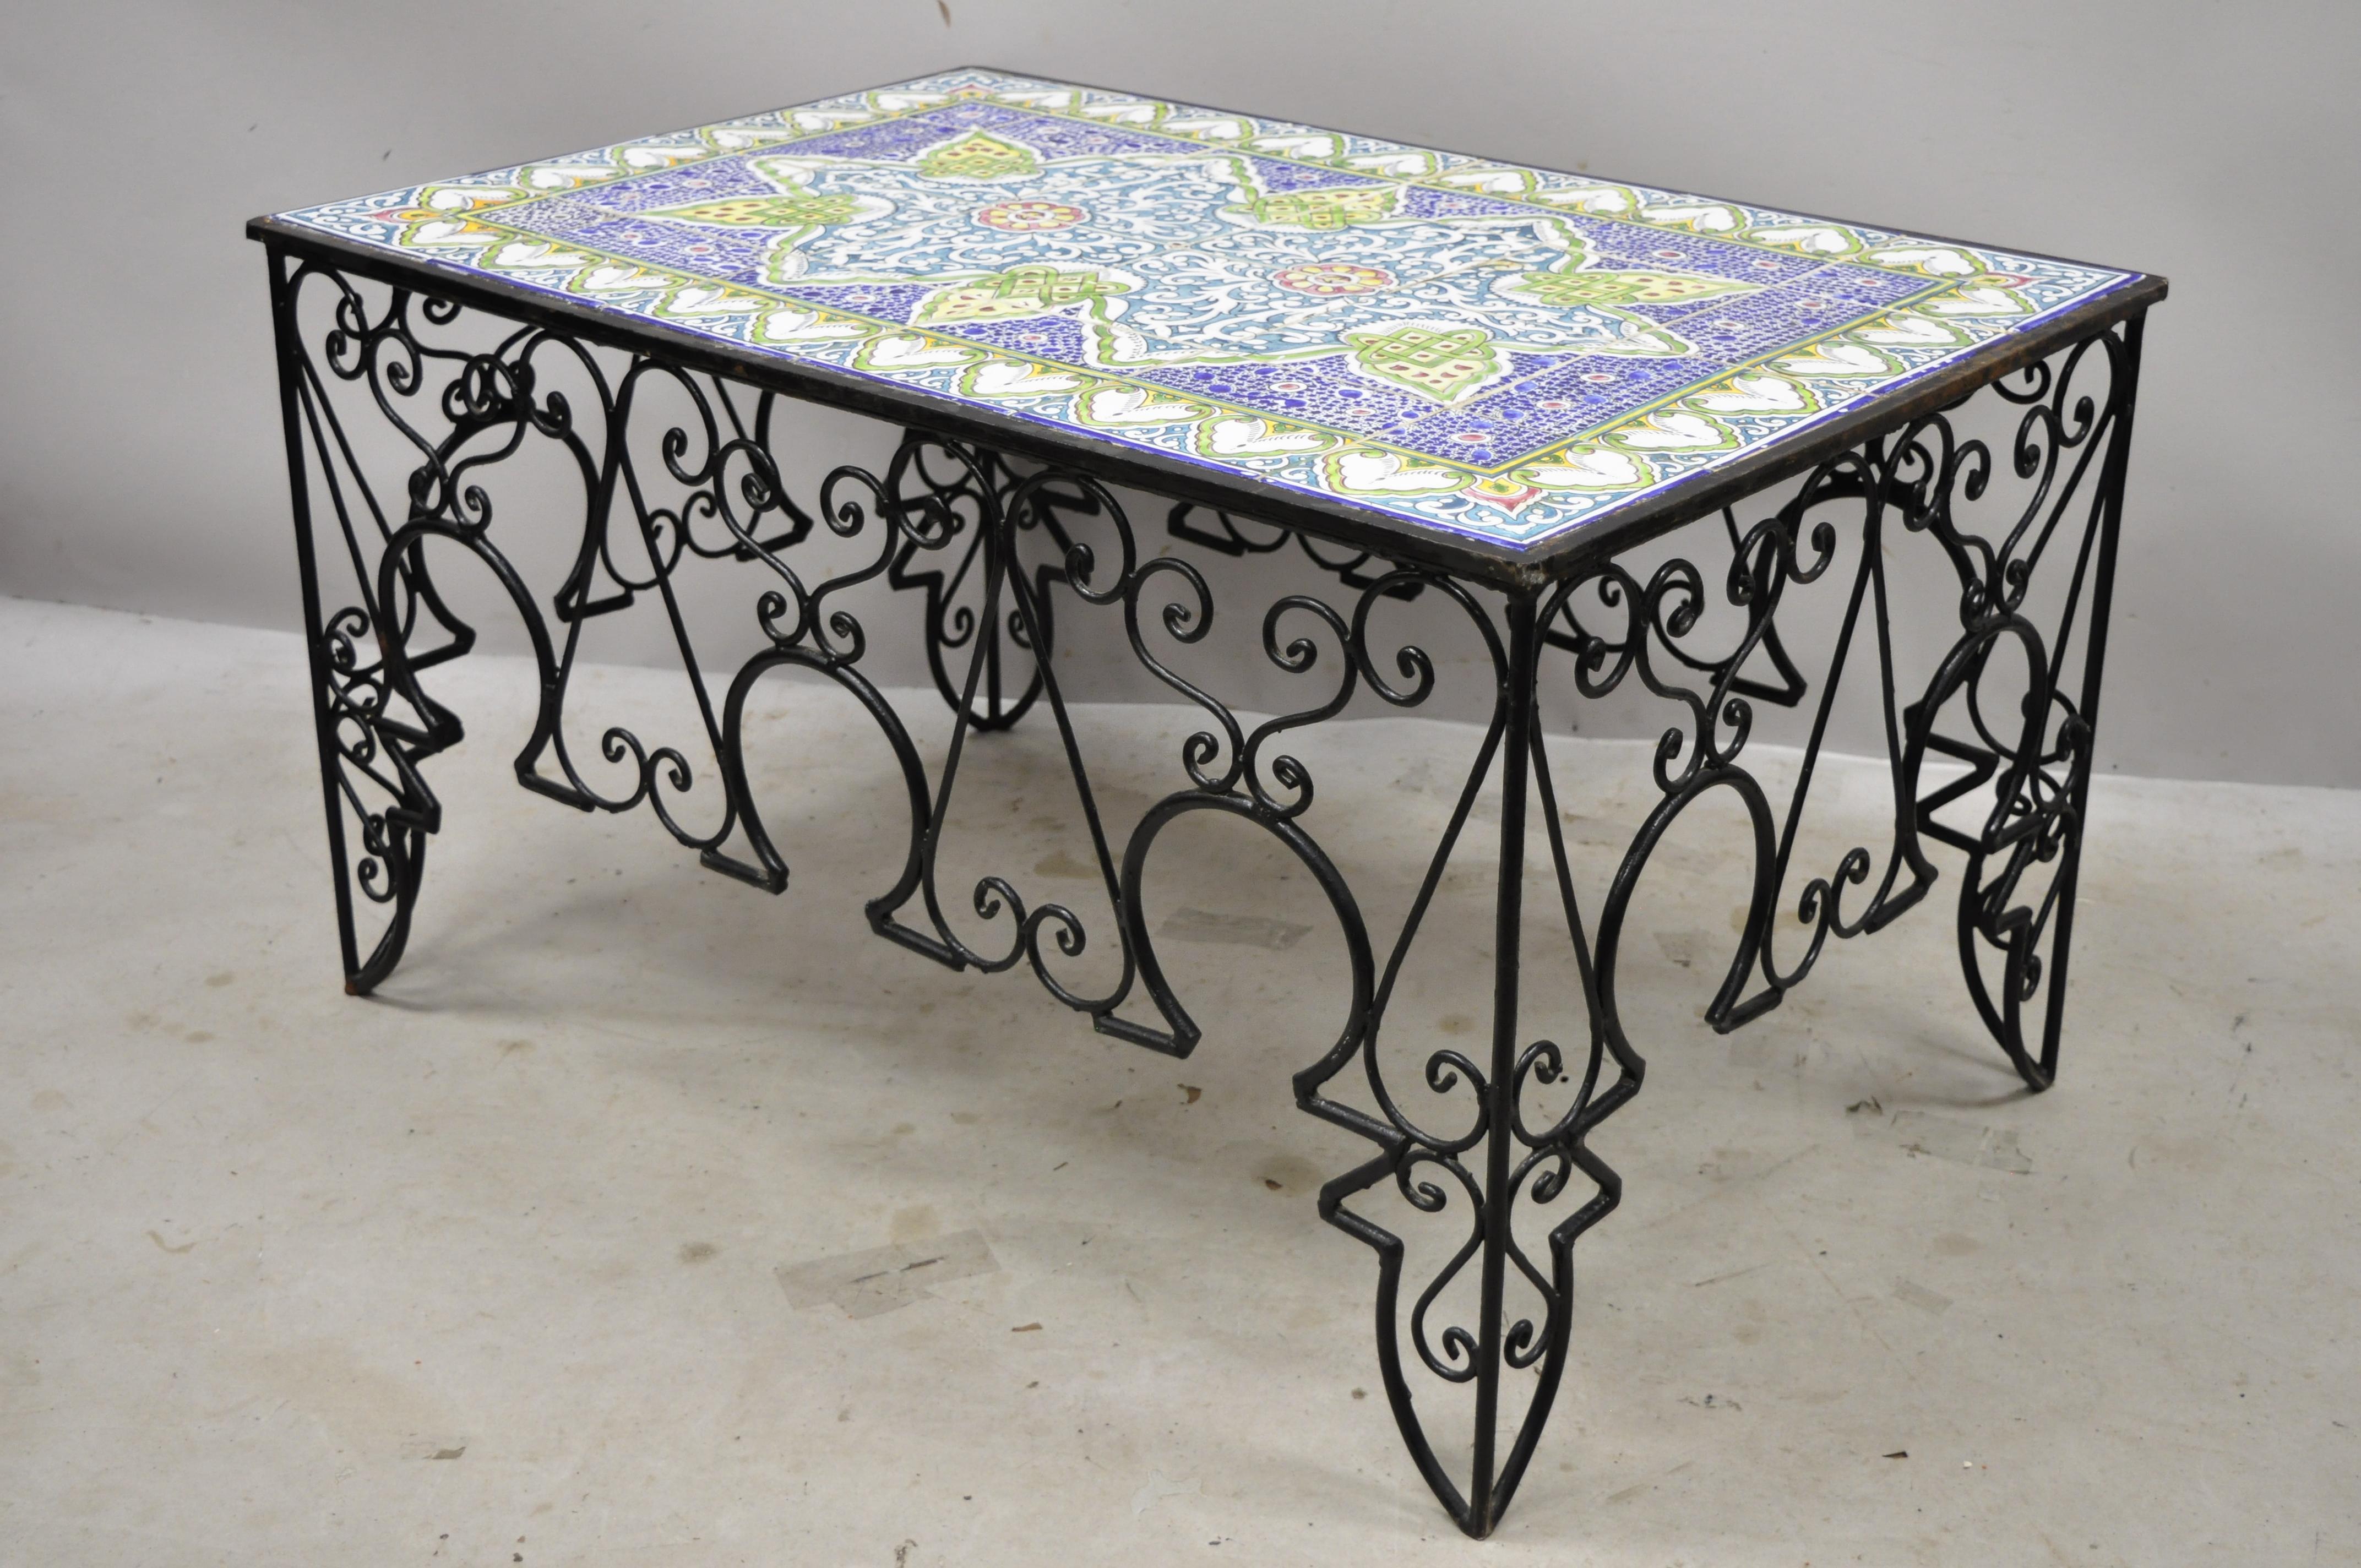 Arts and Crafts Arts & Crafts Ceramic California Tile Wrought Iron Coffee Table Attr. Catalina For Sale